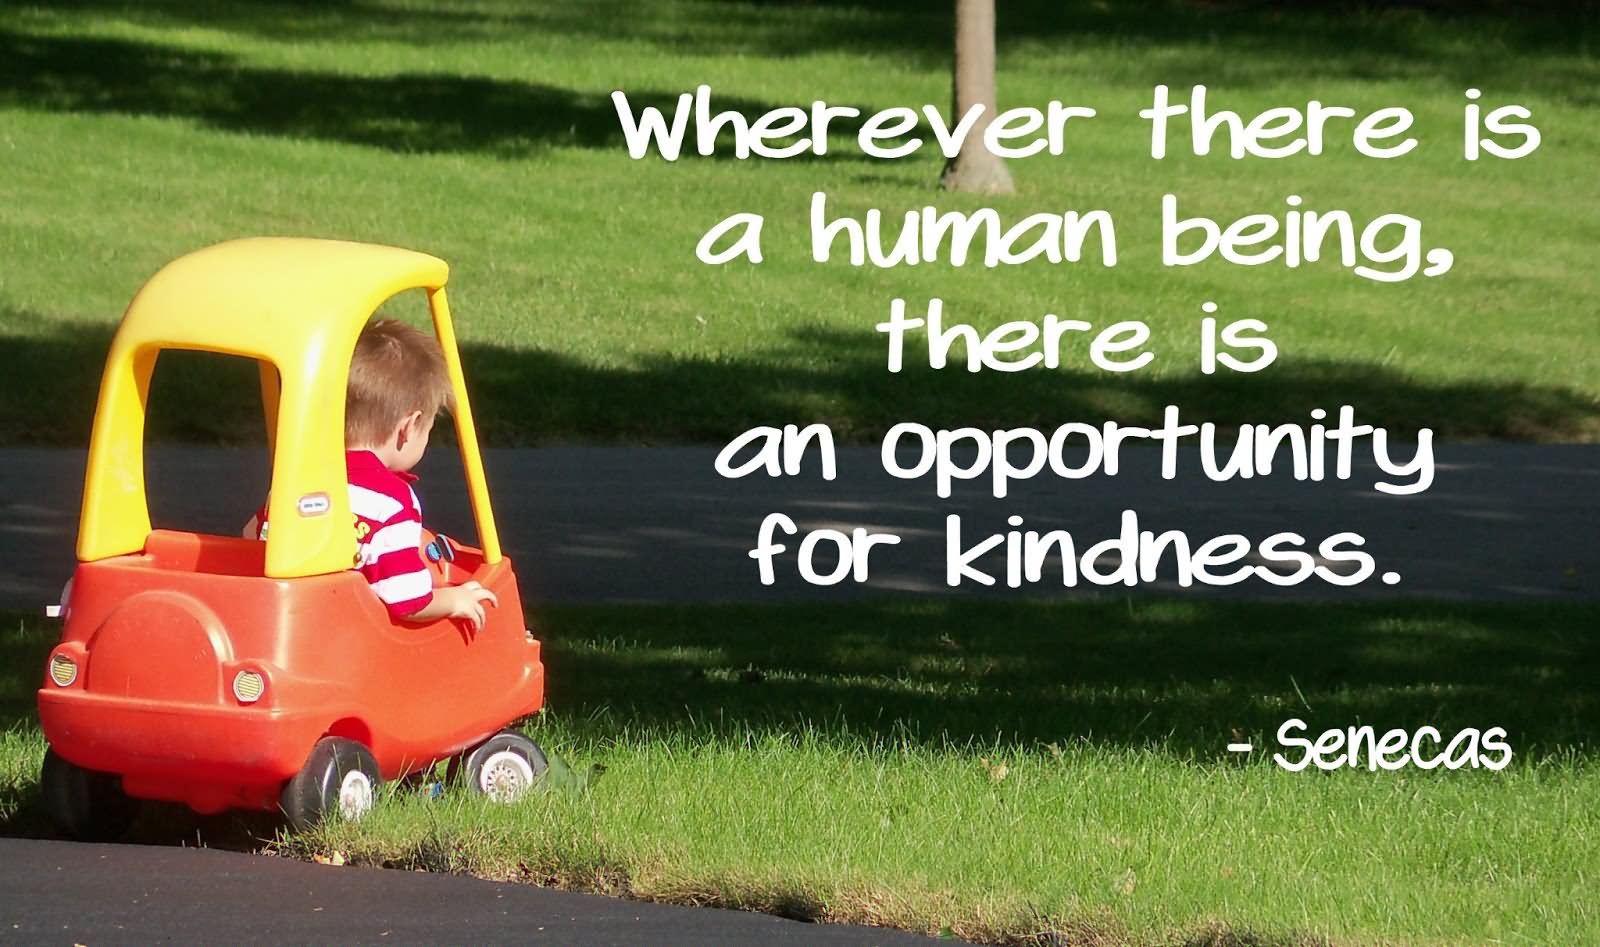 Wherever there is a human being, there is an opportunity for a kindness. - Lucius Annaeus Seneca